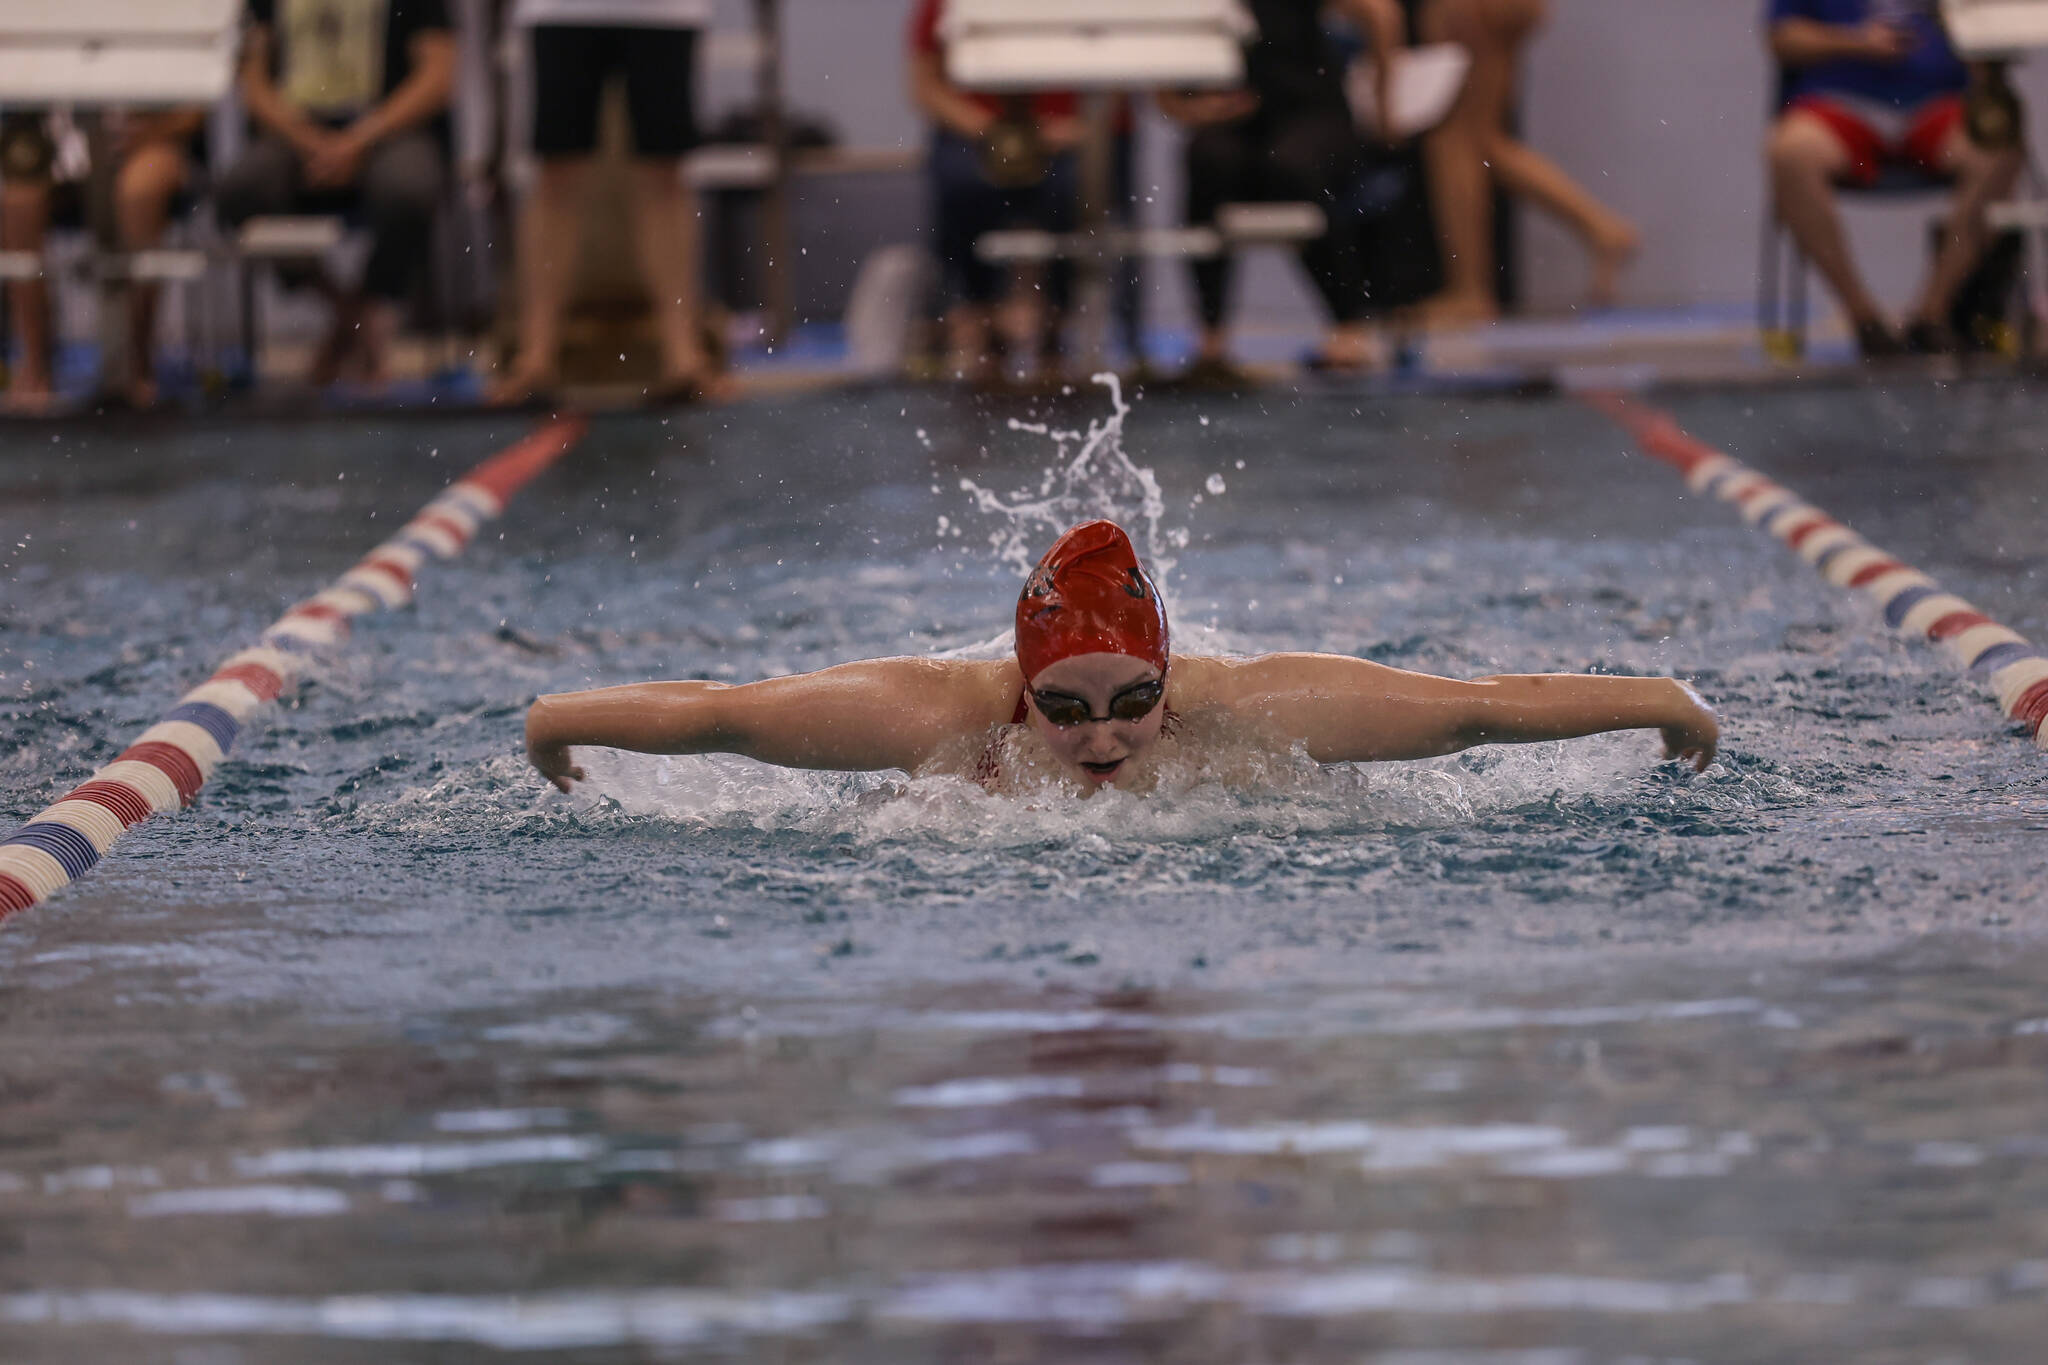 JDHS junior and girl’s team captain Emily Delgado featured in this photo swimming the butterfly stroke at a JDHS/TMHS Dual Meet on August 26. (Courtesy Photo / Phil Loseby)